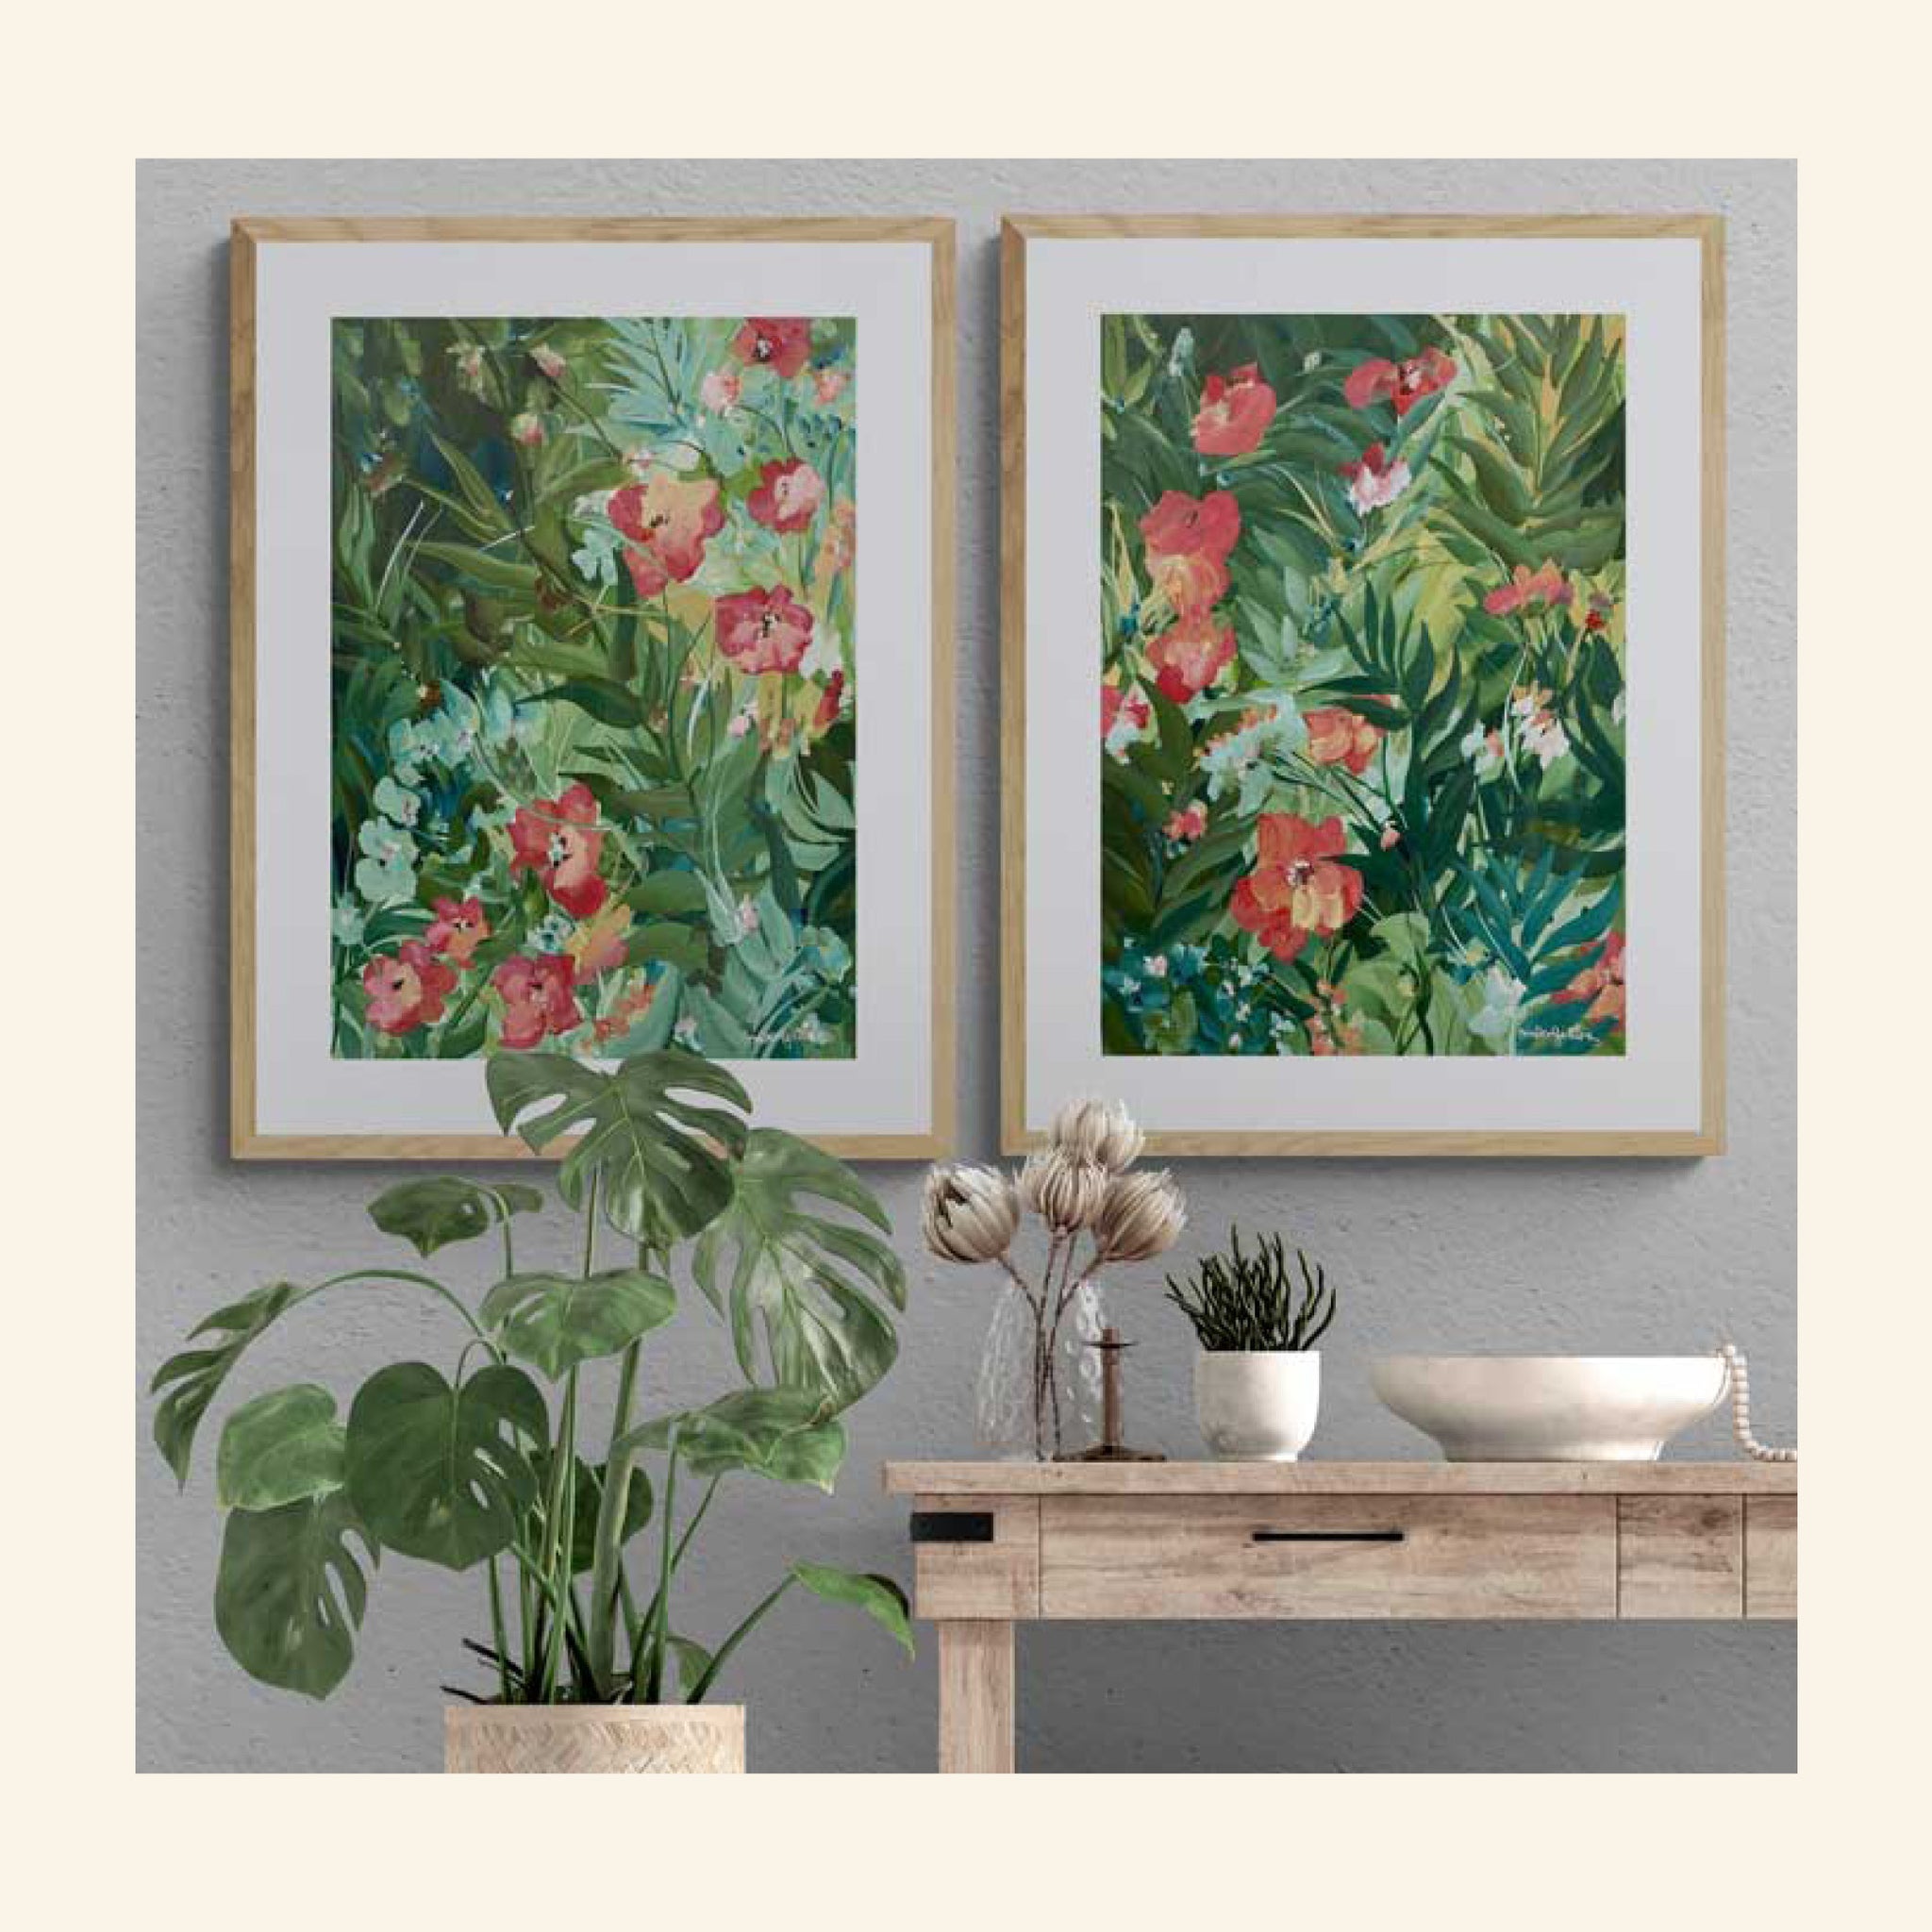 Original art, two flower tropical paintings on a wall